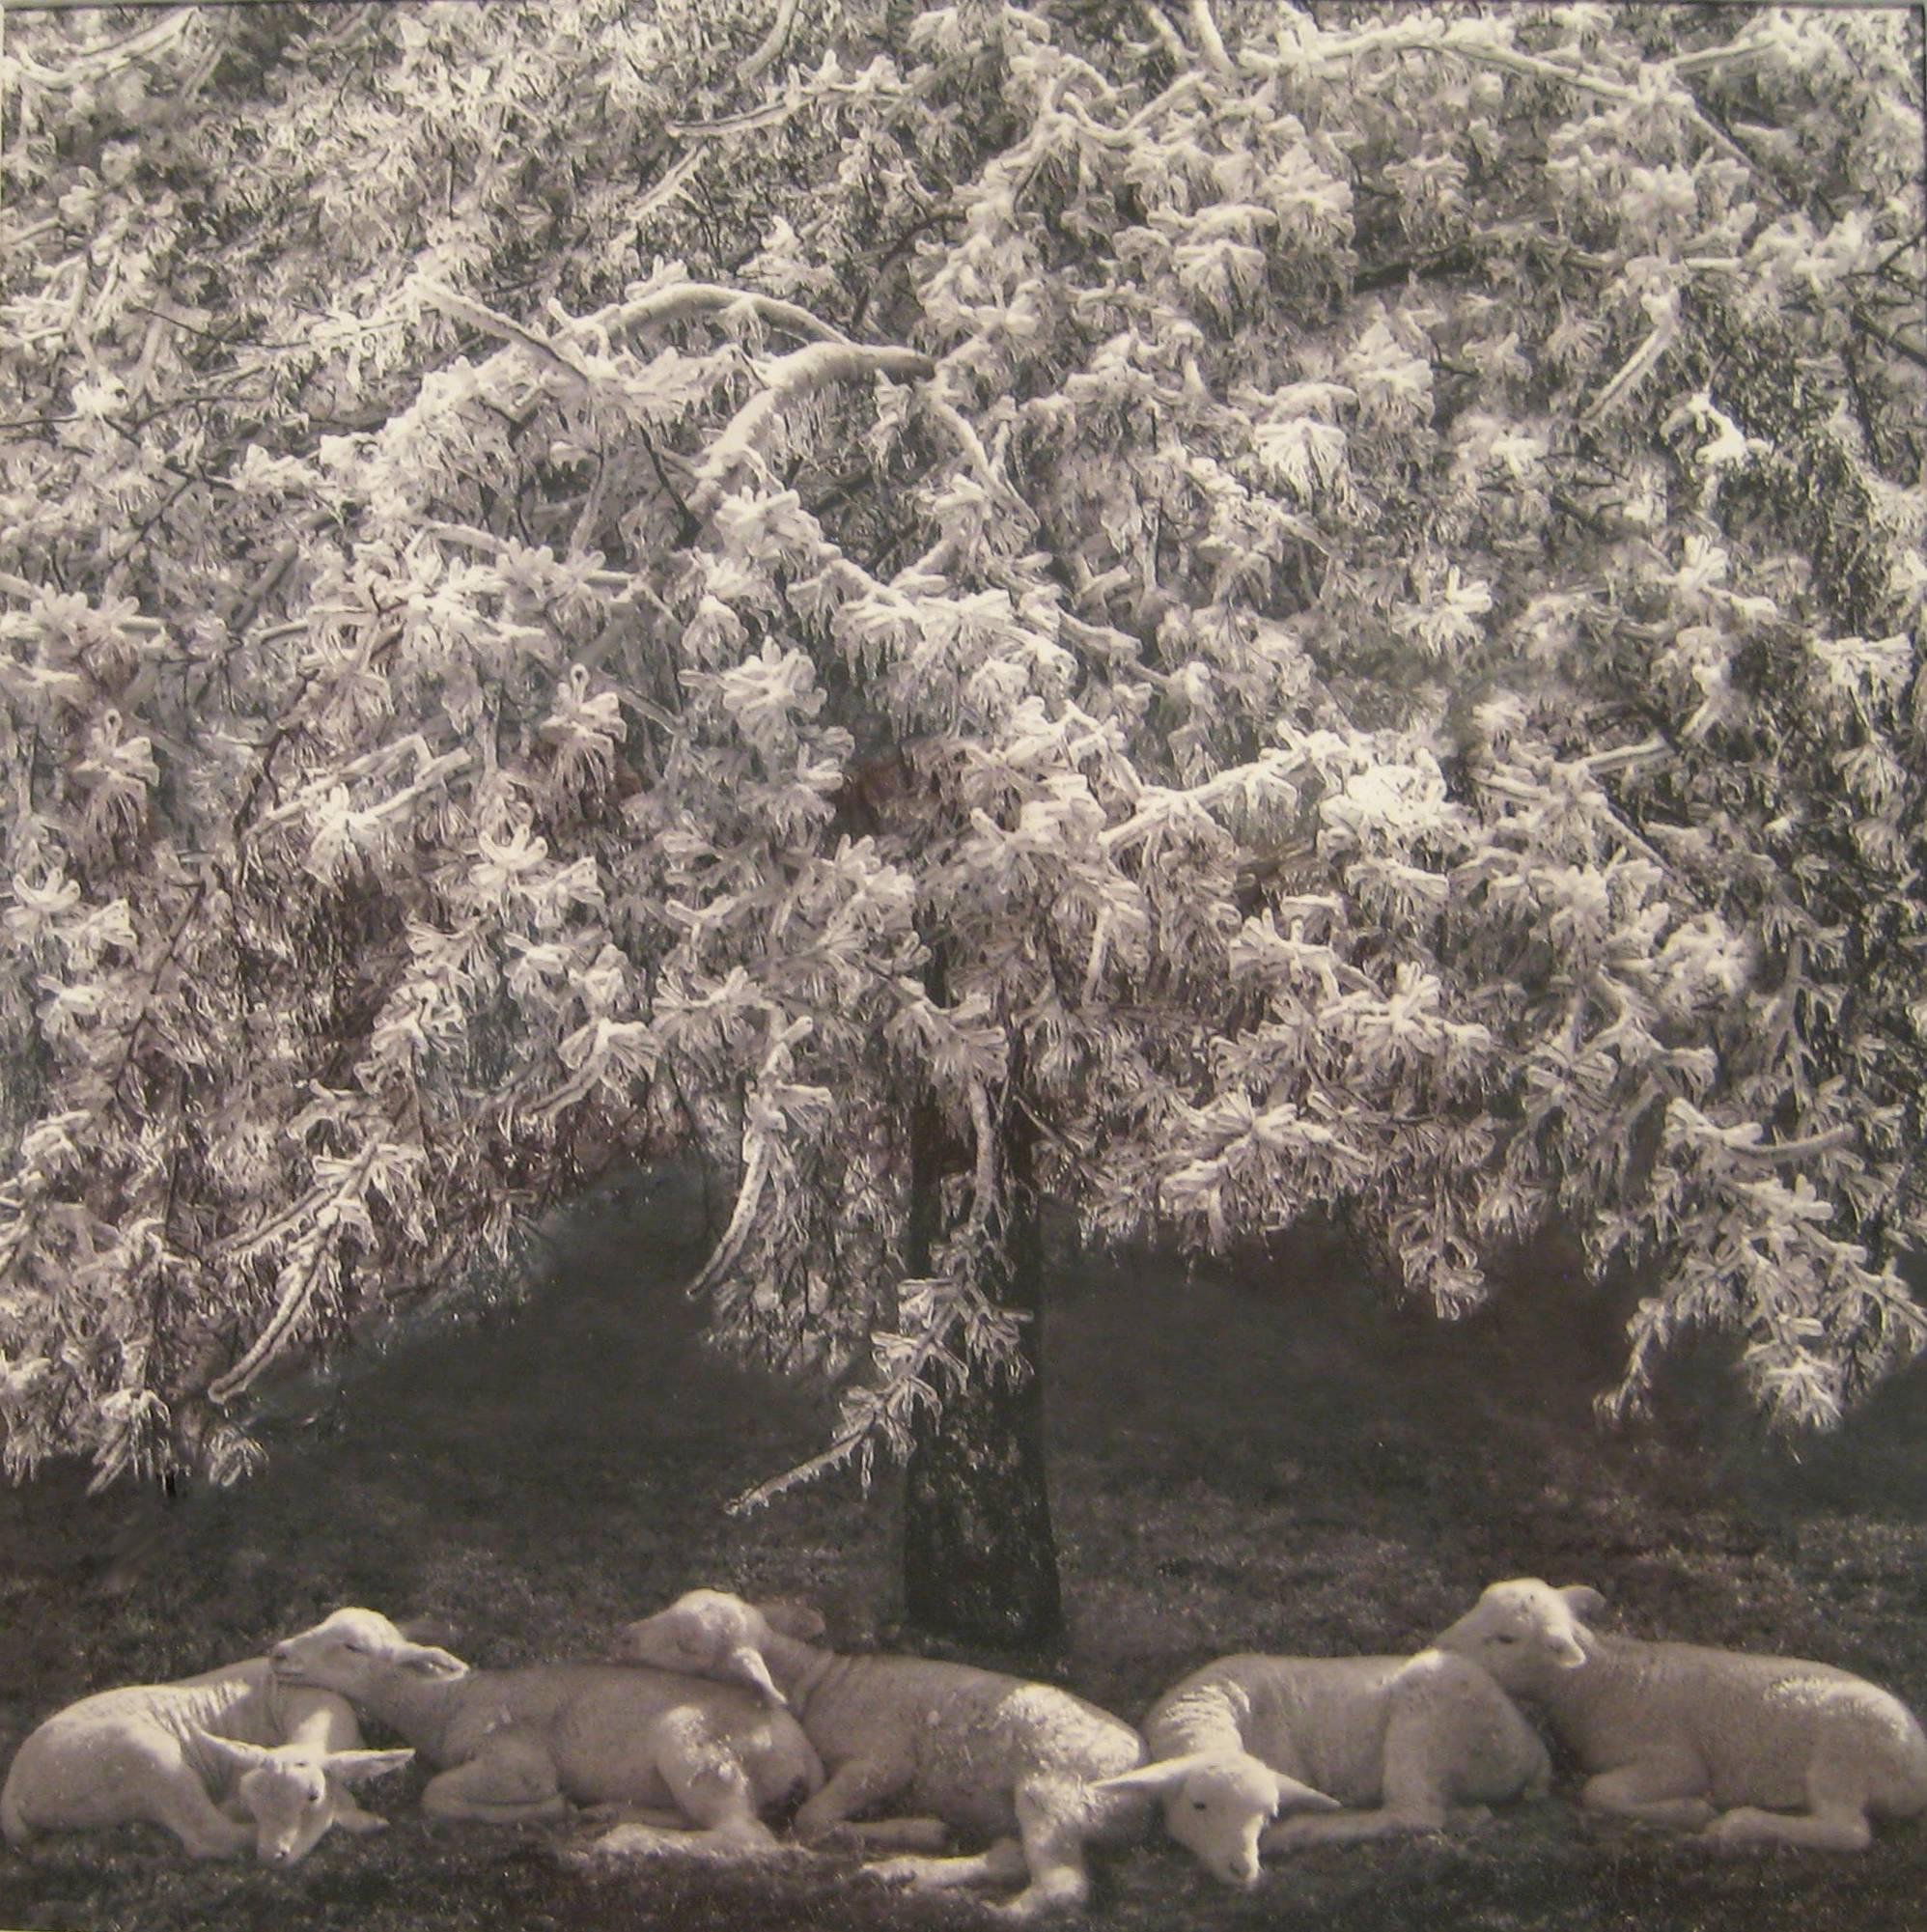 Winter Lambs (Framed Black and White Photograph of White Lambs in a Landscape)